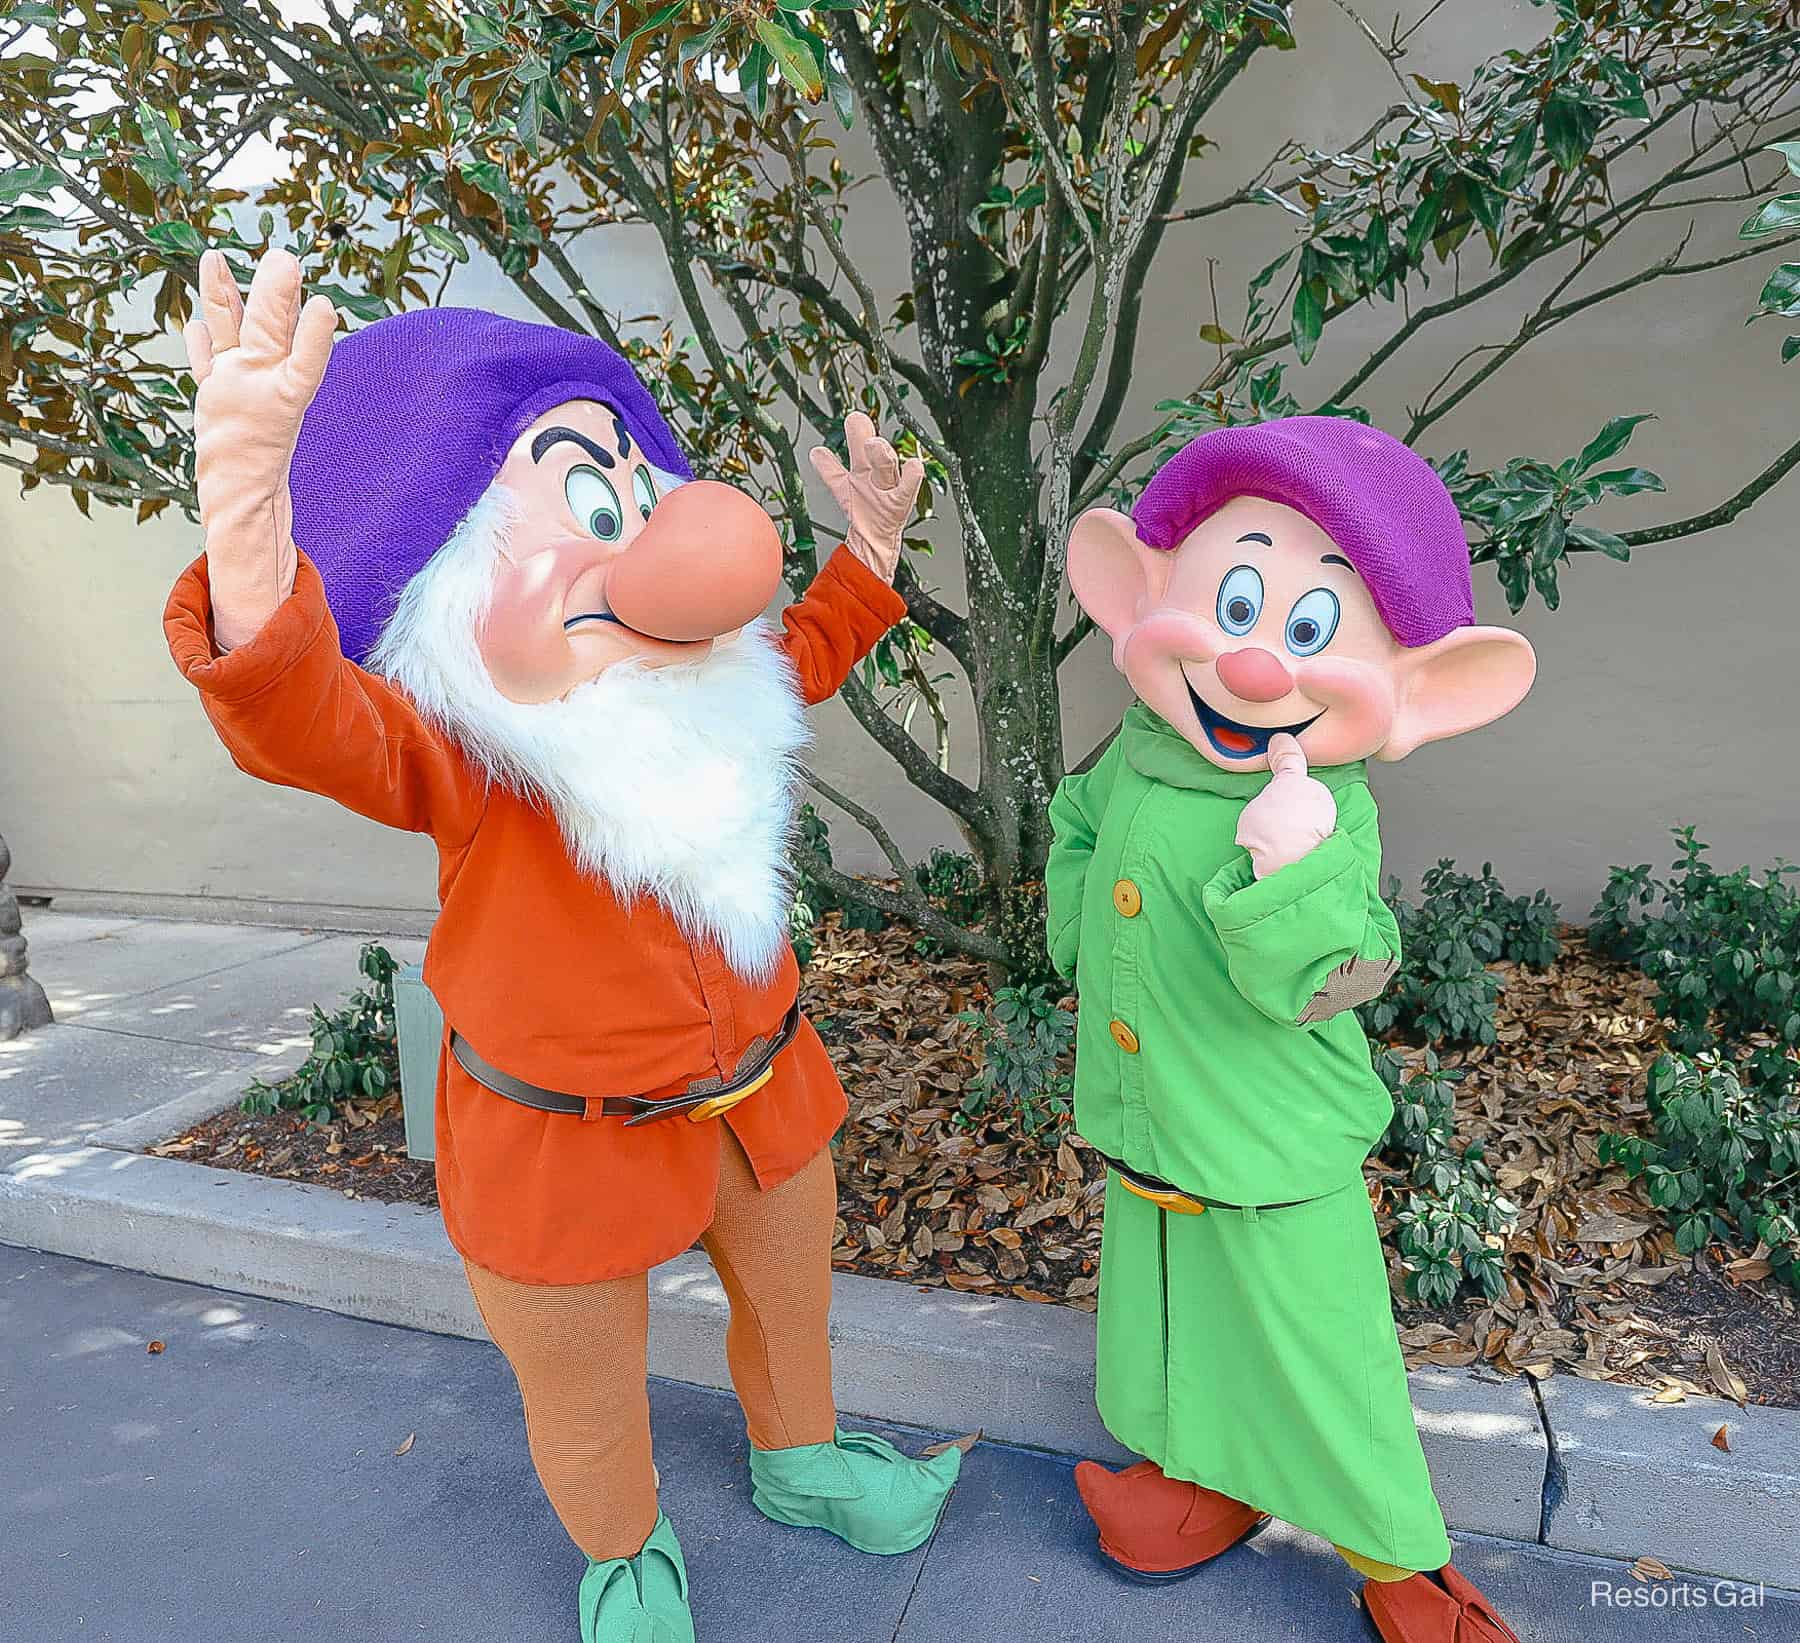 Grumpy and Dopey of the Seven Dwarfs 